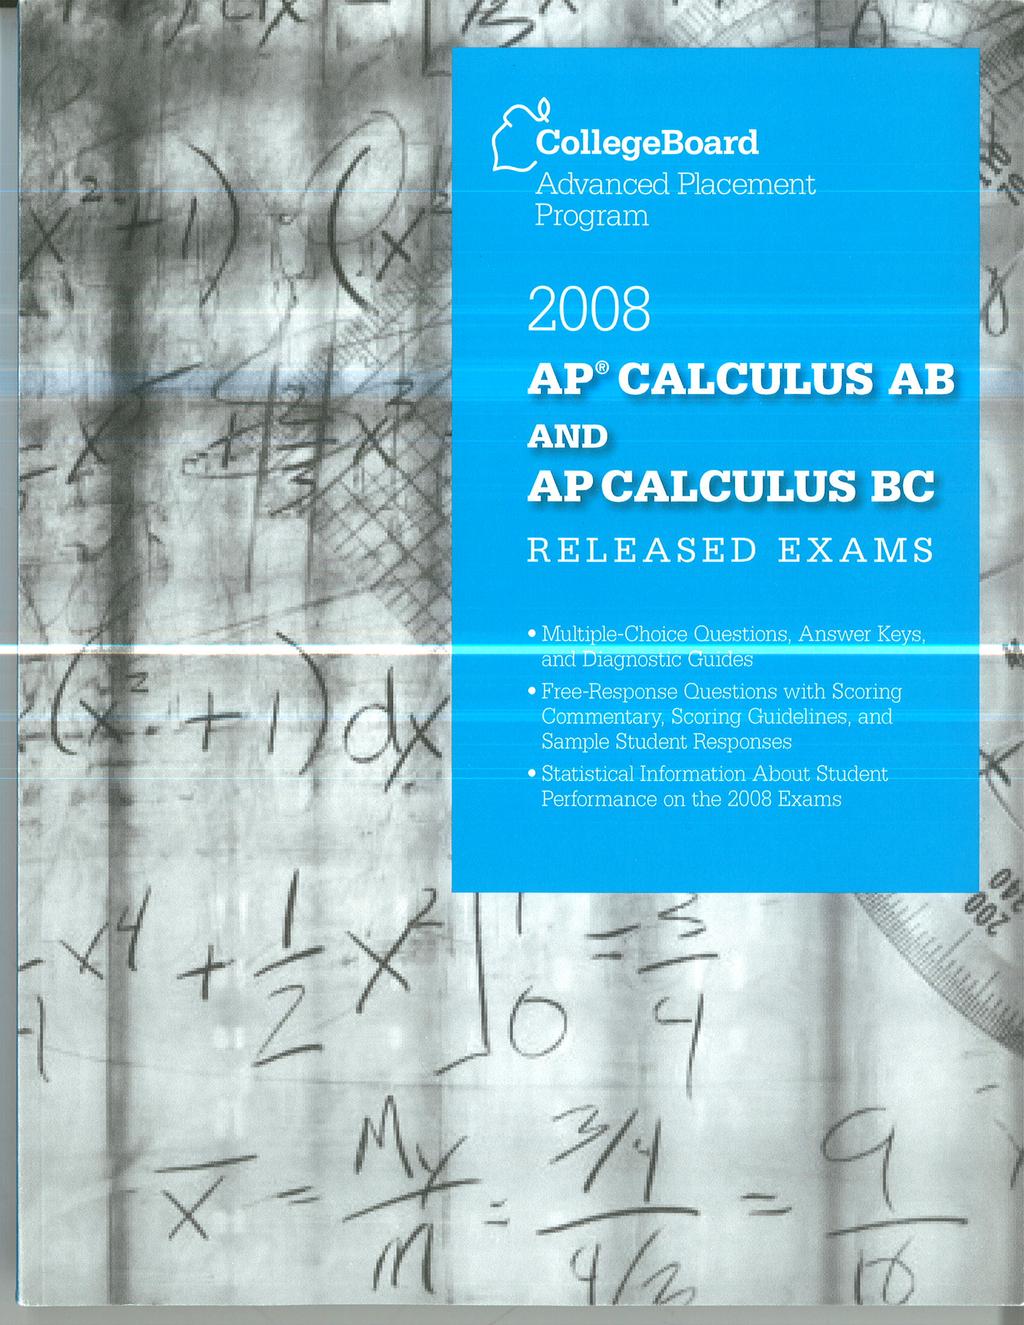 Those who do not have access to calculus in high school are at a serious disadvantage.